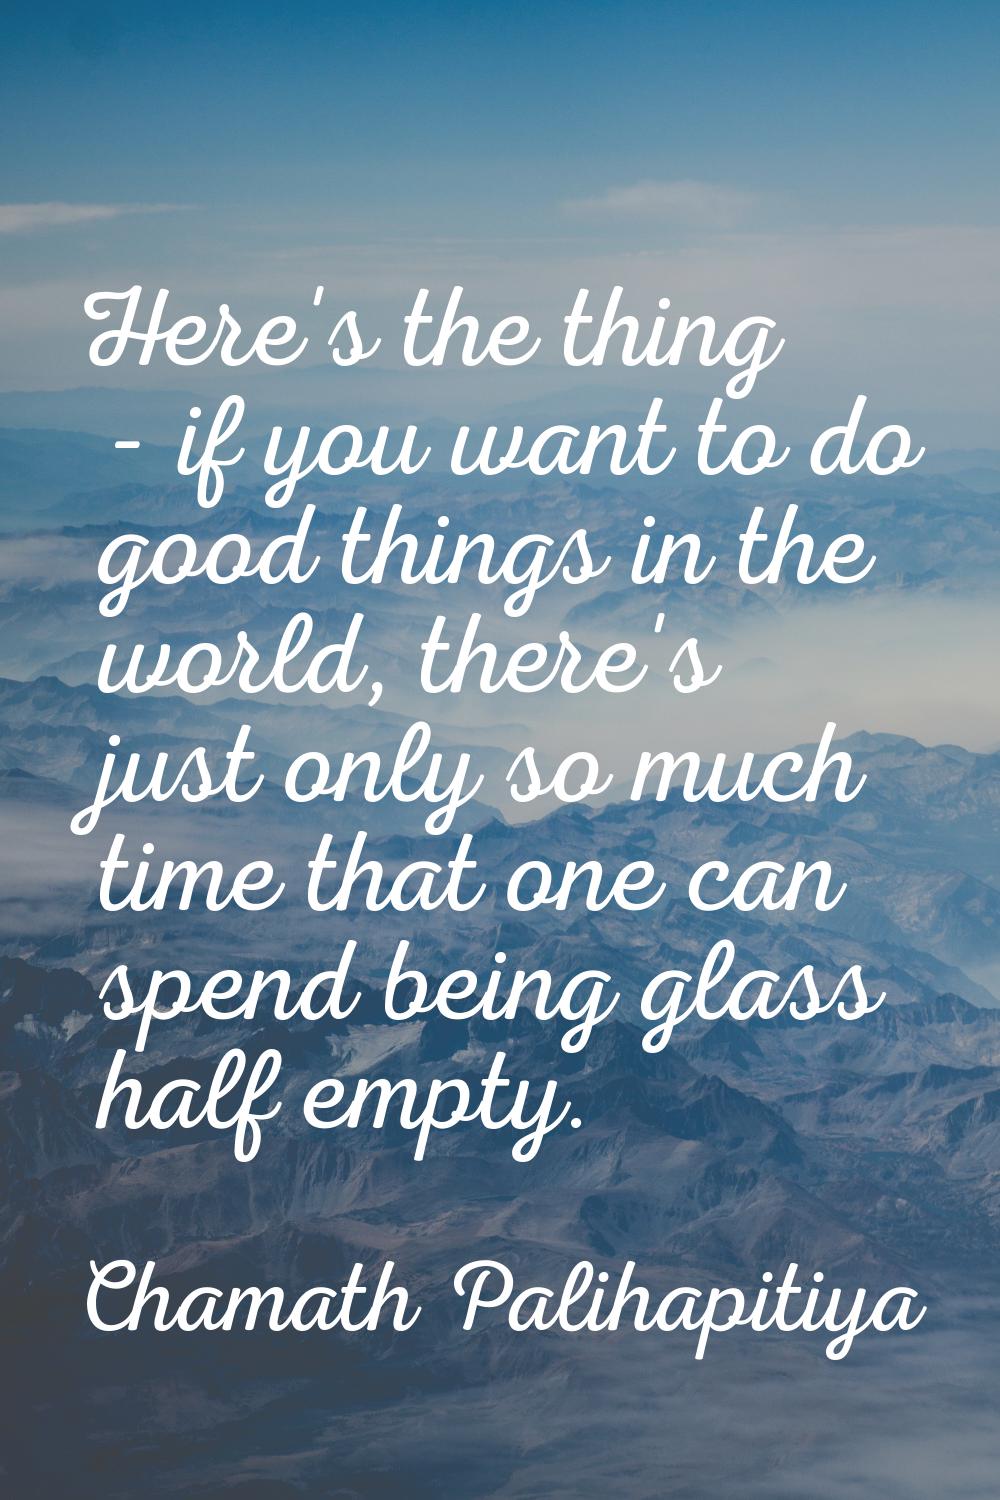 Here's the thing - if you want to do good things in the world, there's just only so much time that 